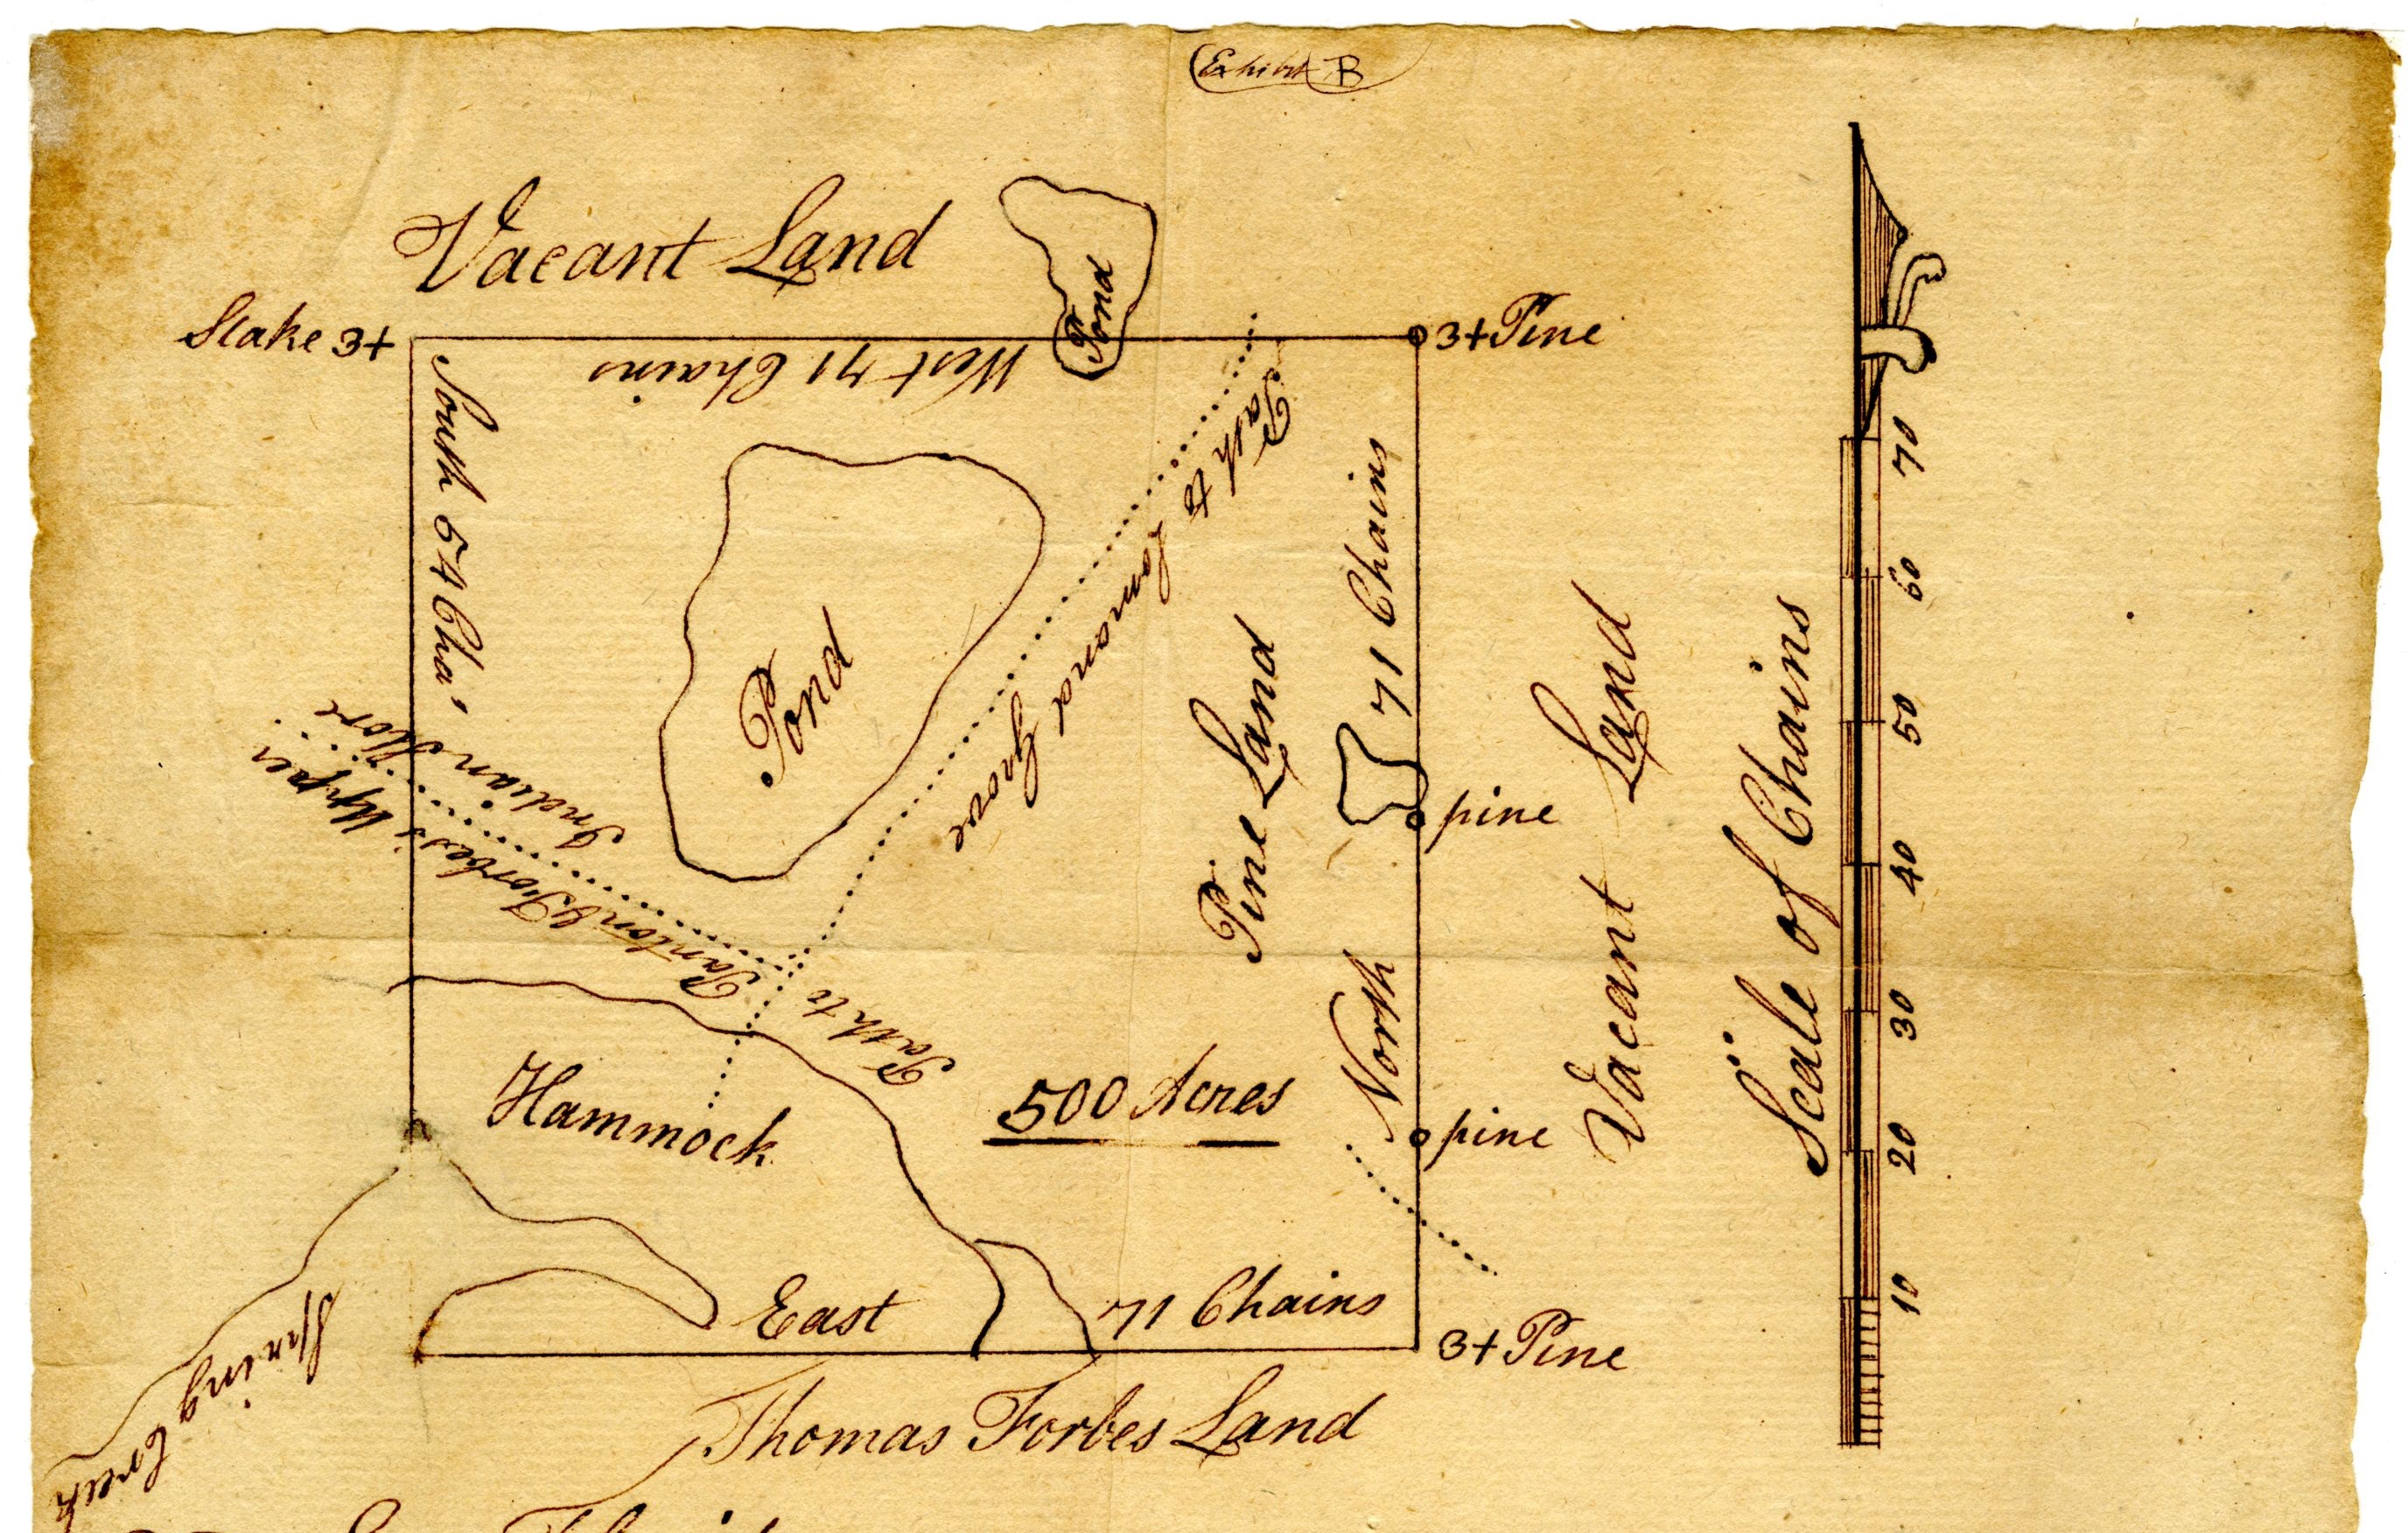 Excerpt of a 1779 survey plat depicting a plot of land near Spring Garden granted to William Panton by the British government. Box 32, Folder 23, Confirmed Spanish Land Grants (Series S990), State Archives of Florida. Click or tap the image to view the full map and the entire land grant dossier.